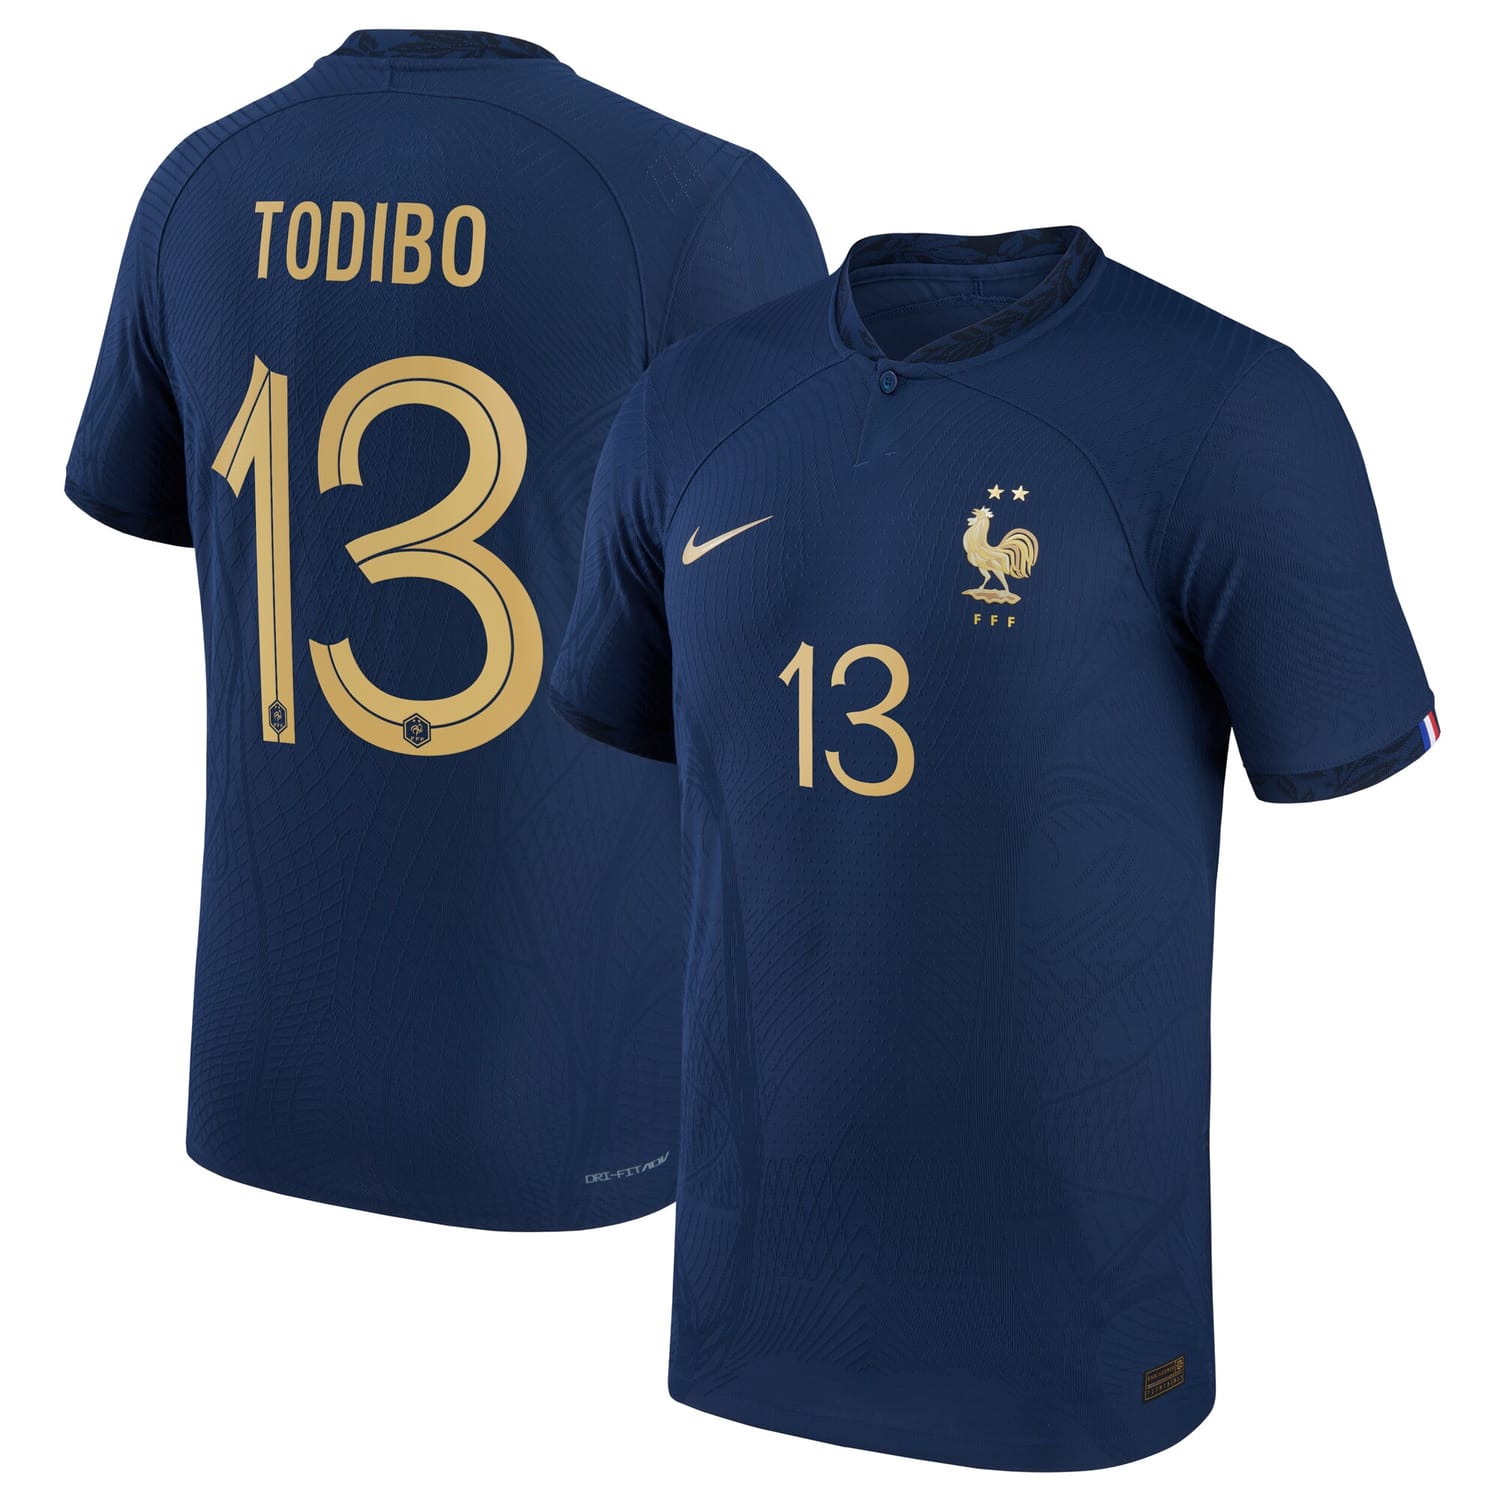 France National Team Home Authentic Jersey Shirt 2022 player Todibo 13 printing for Men